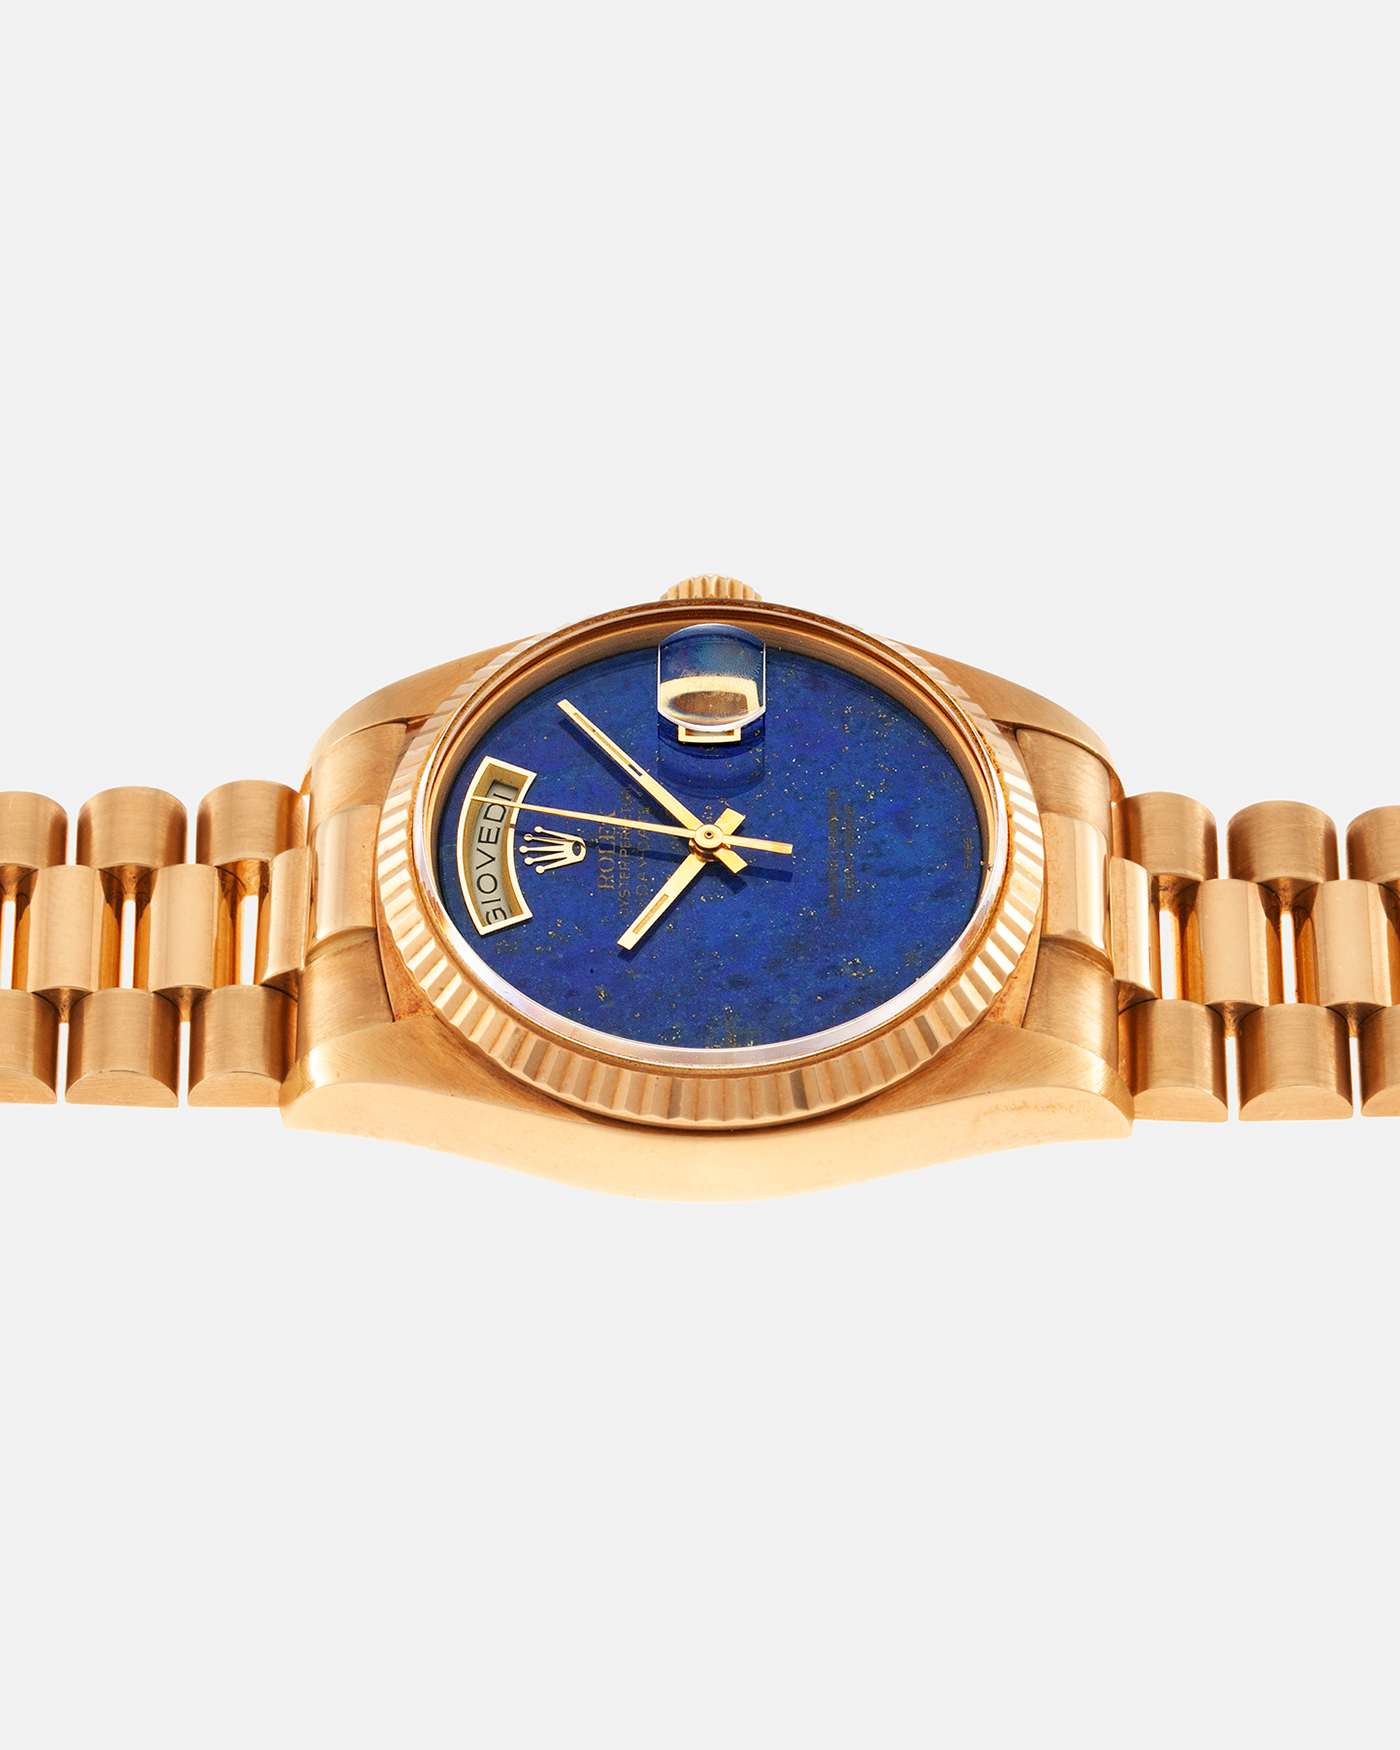 Brand: Rolex Year: 1979 Model: Day-Date, ‘Lapis Lazuli’ Reference Number: 18038 Serial: 612XXXX Material: 18-carat Yellow Gold Movement: Rolex Cal. 3055, Self-Winding Case Diameter: 36mm Lug Width: 20mm Bracelet: Rolex ‘8385’ 18-carat Solid Gold Presidential Bracelet with ‘55’ Curved End Links